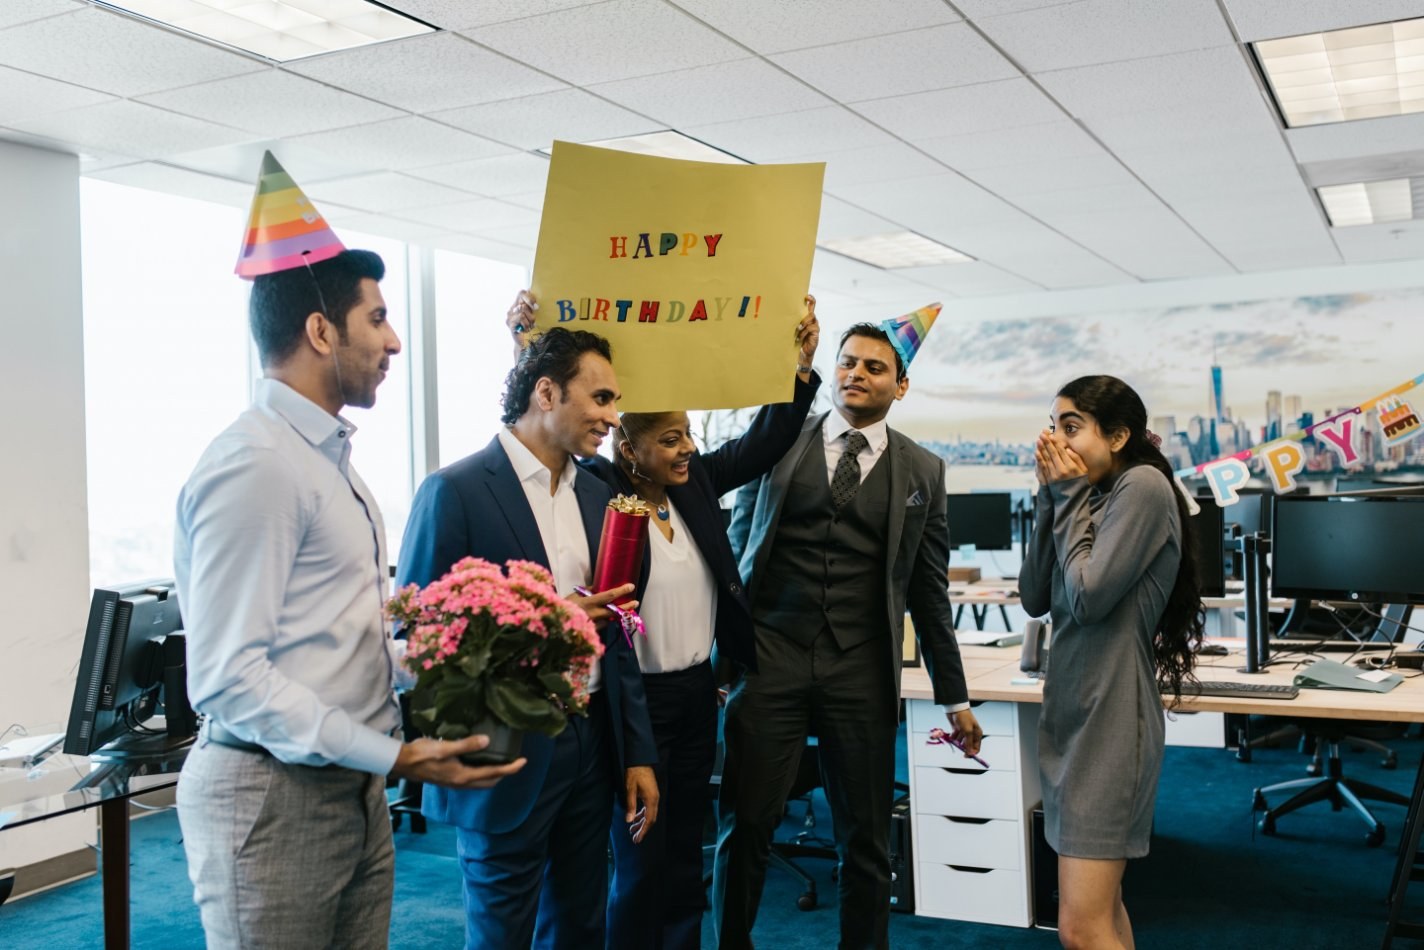 Co workers hosting a surprise birthday party